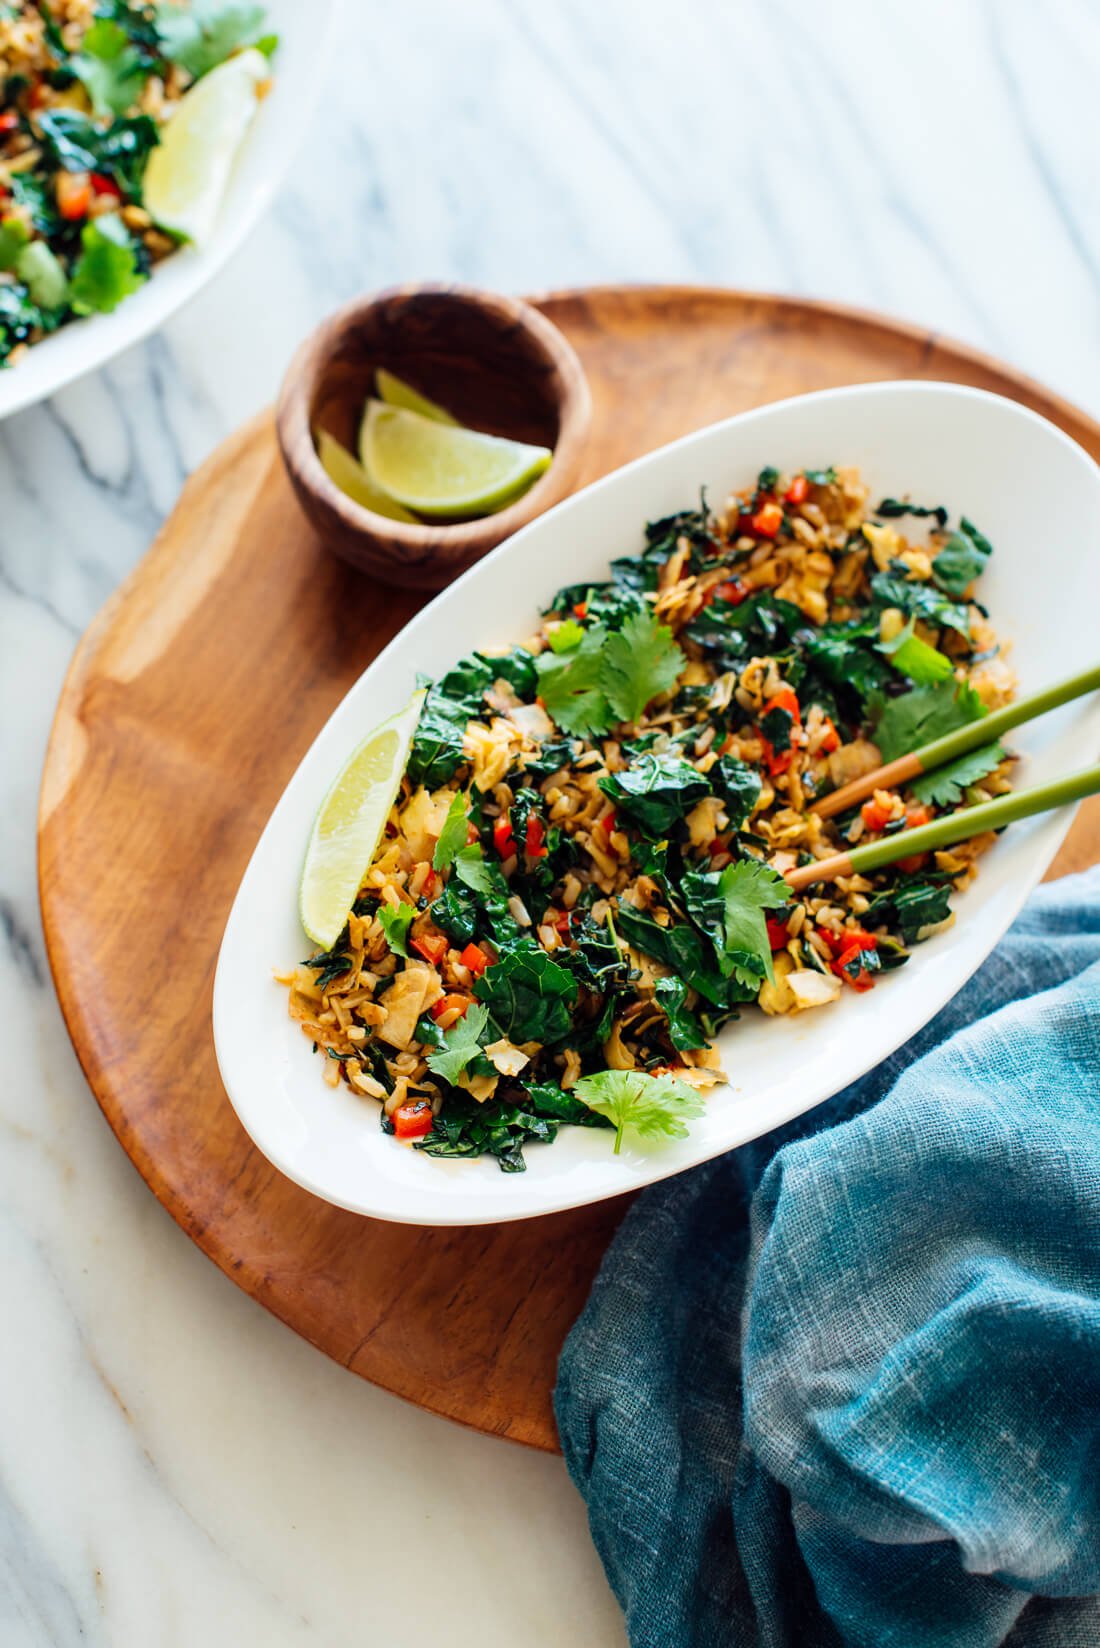 spicy kale and coconut stir-fry recipe